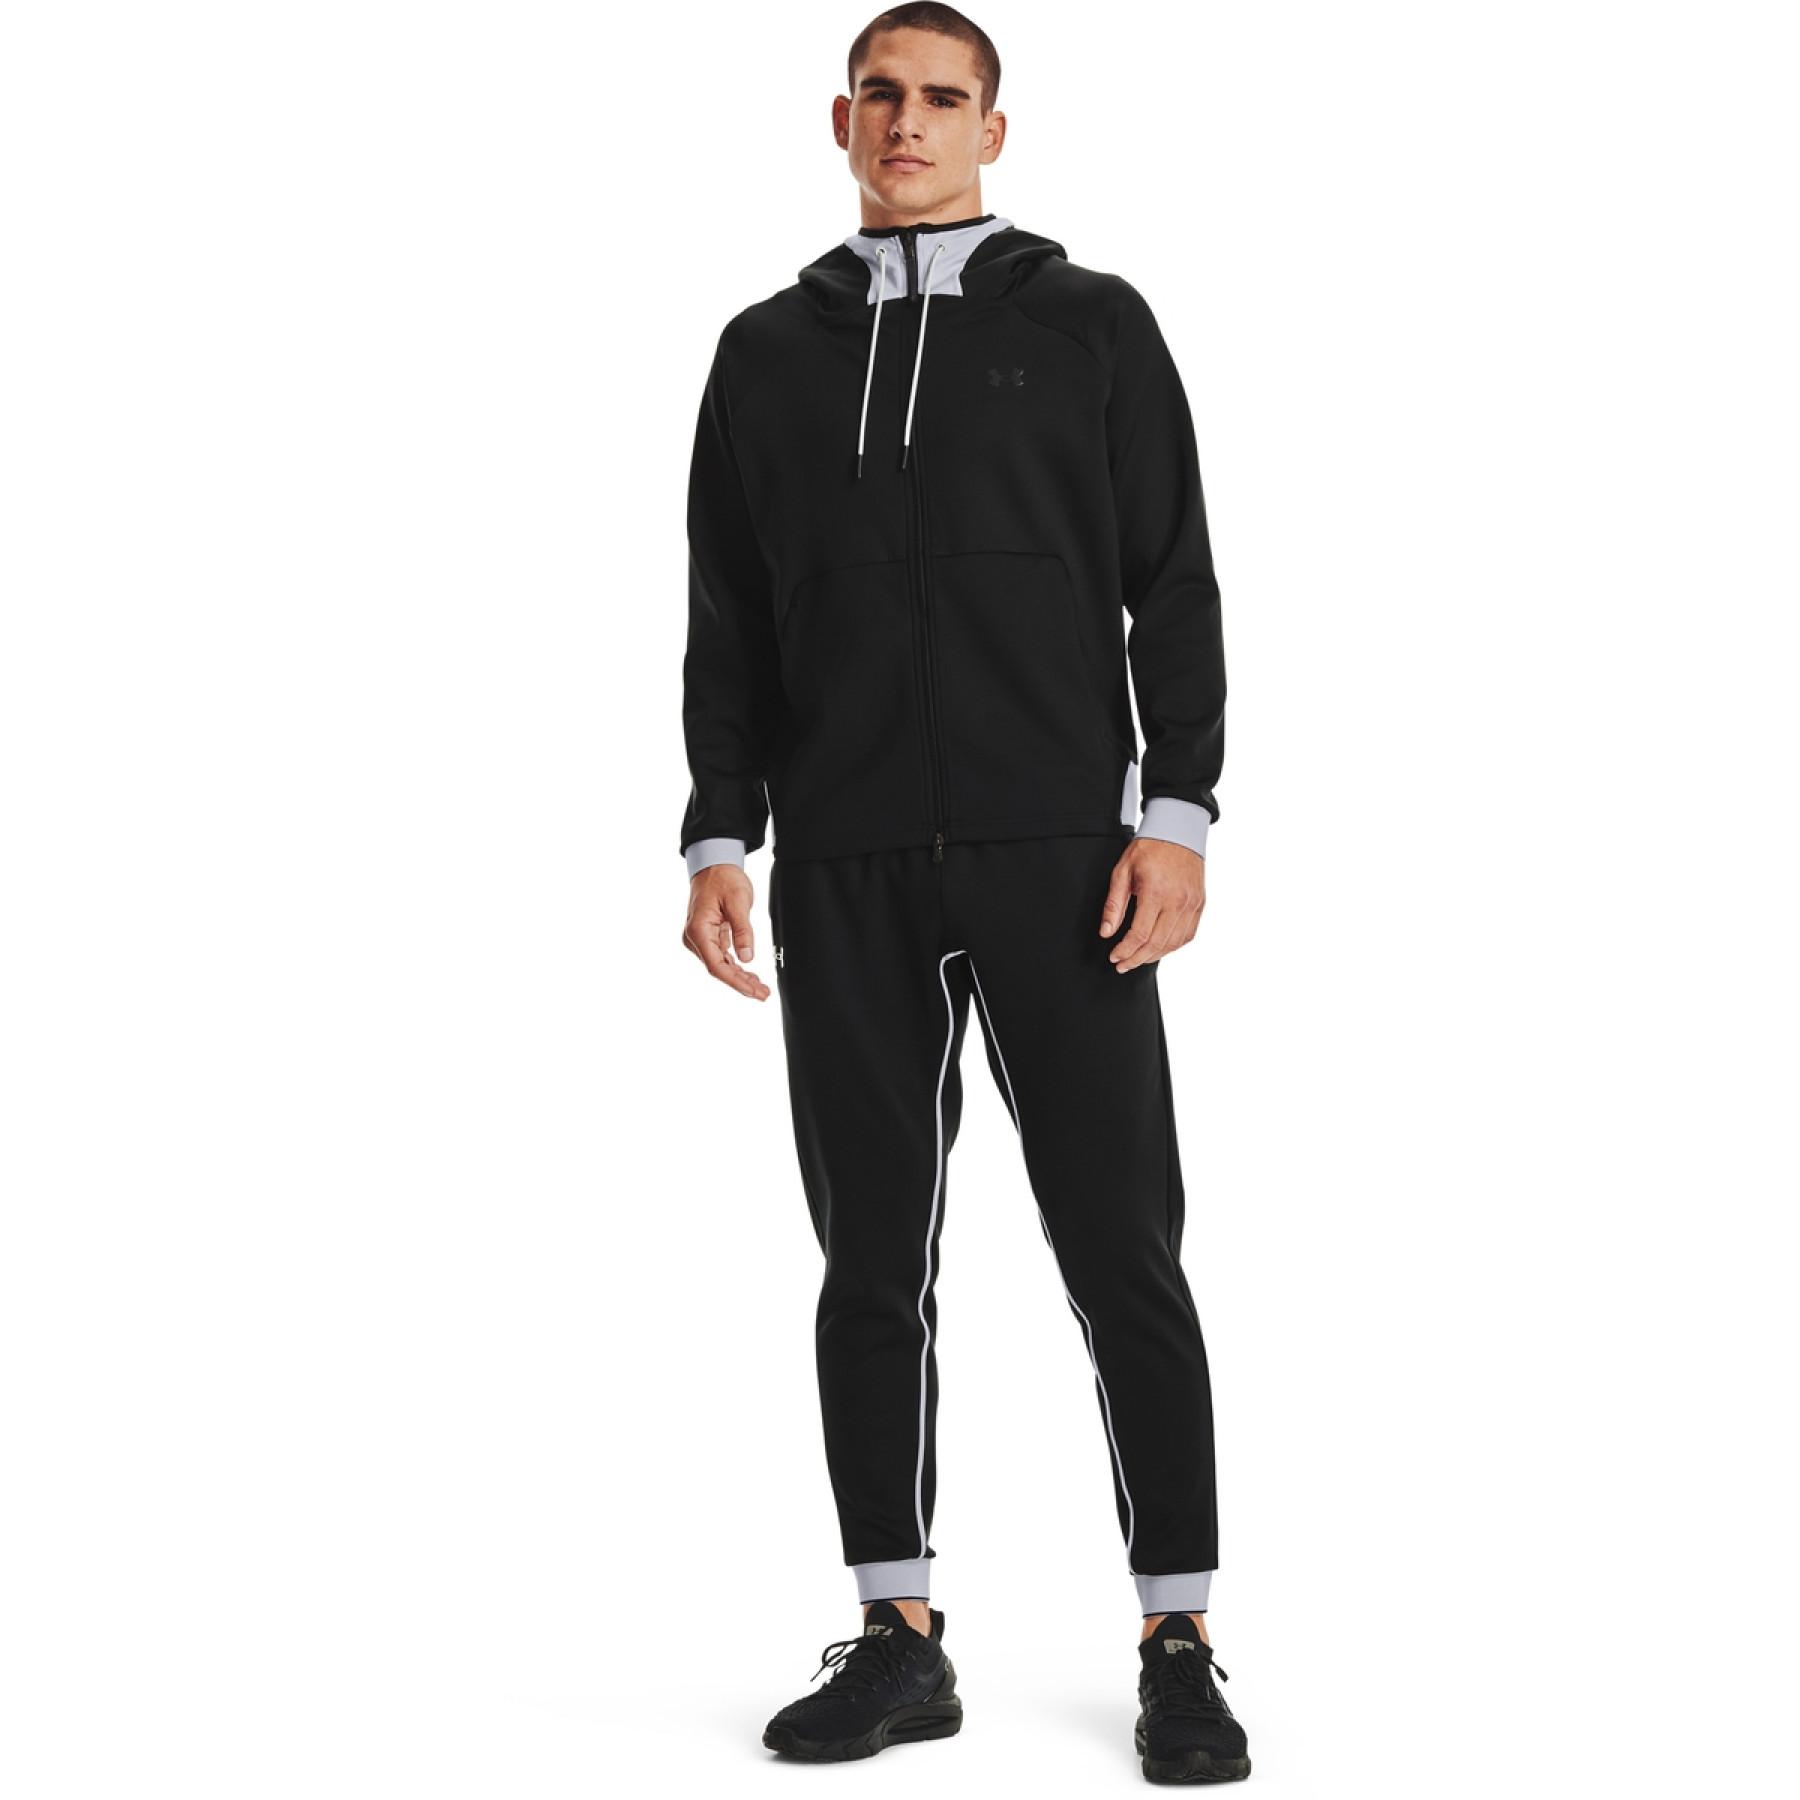 Sweat Under Armour recover full Zip